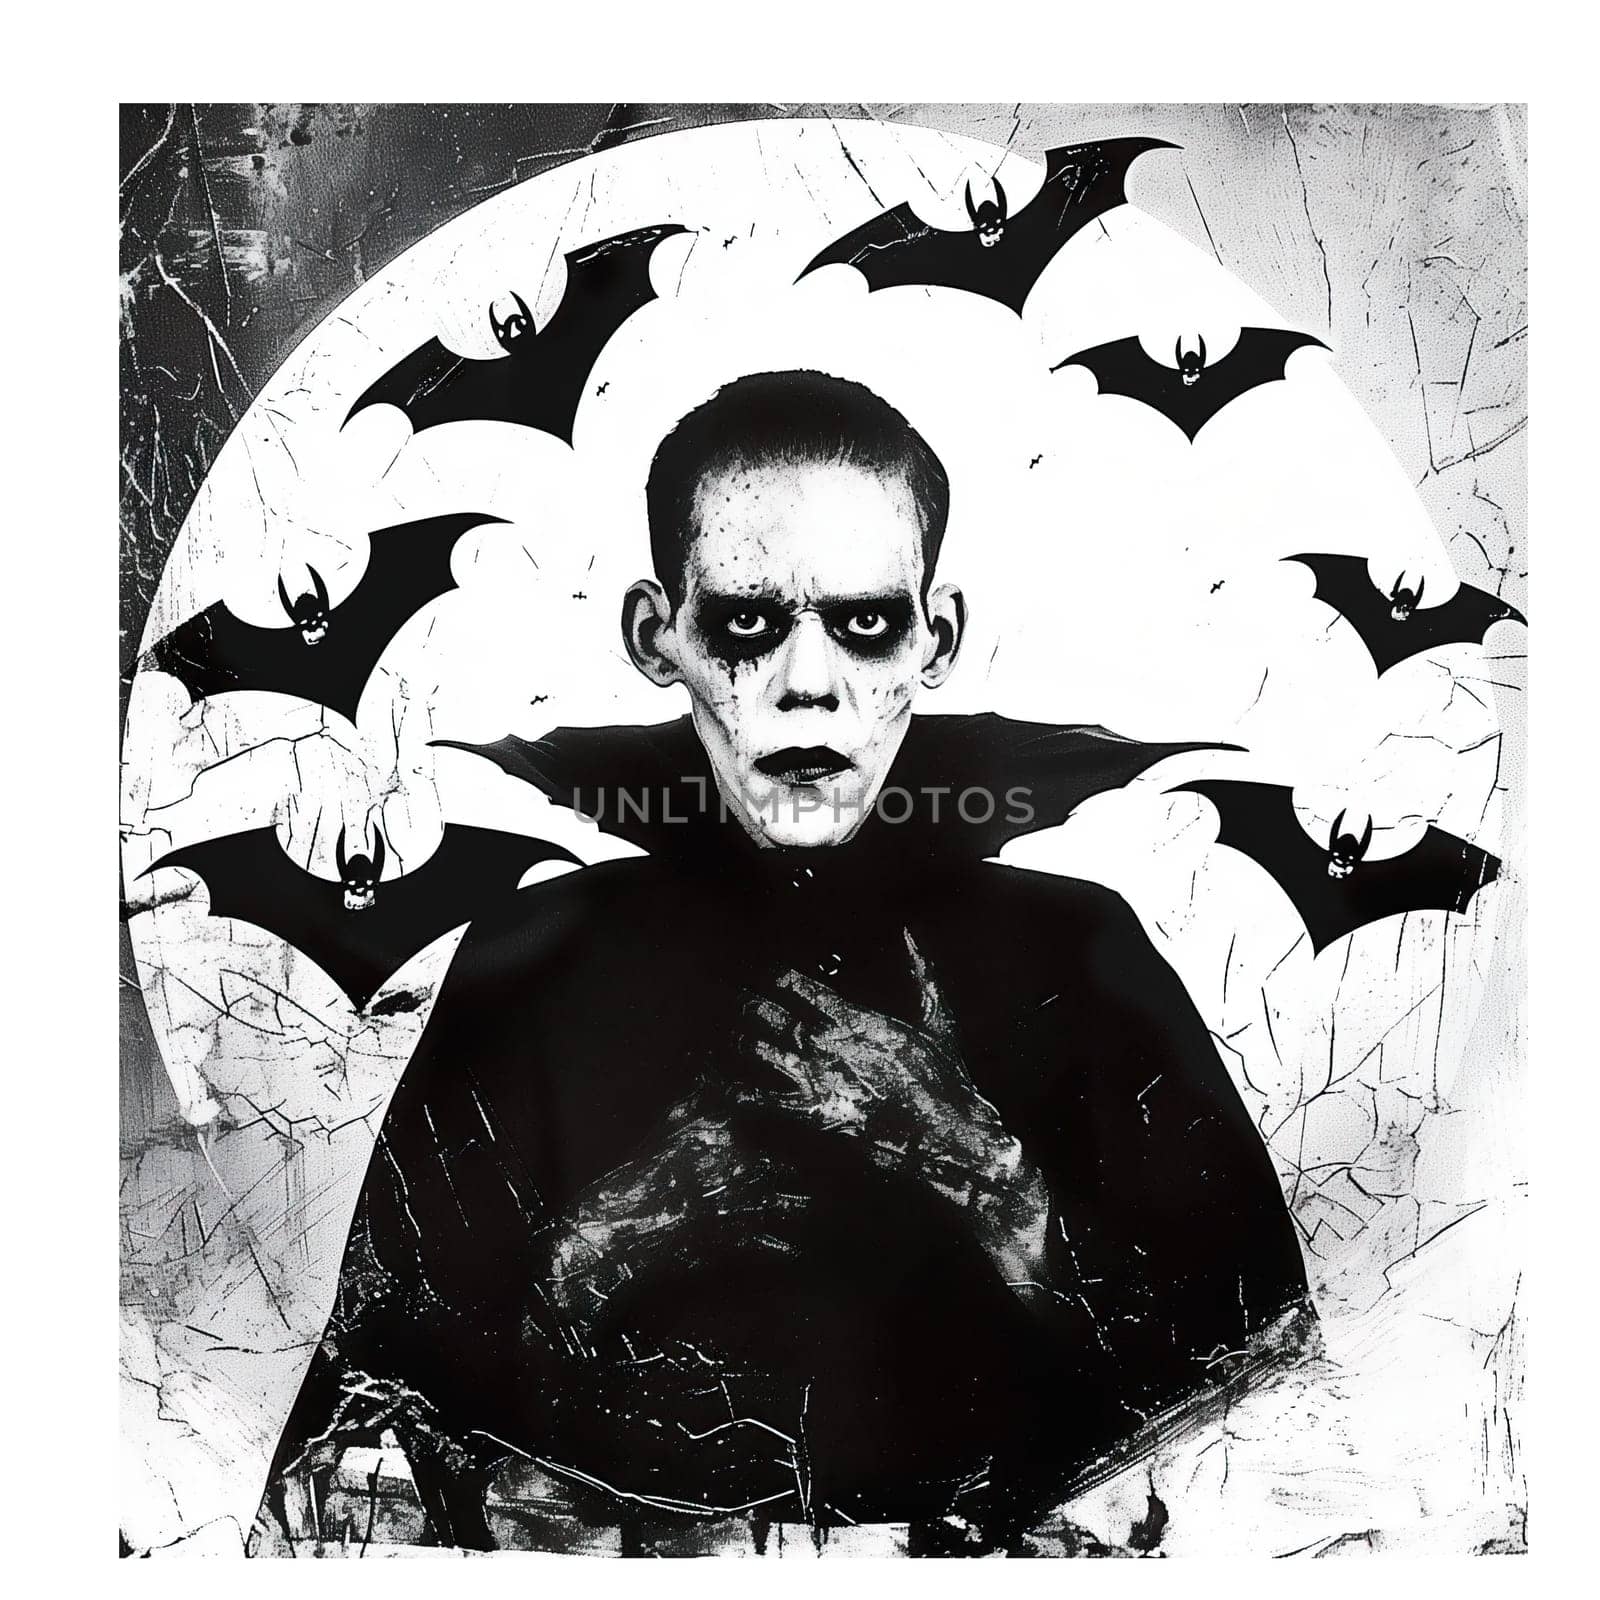 Monochrome vintage photo of halloween vampire cut out image by Dustick